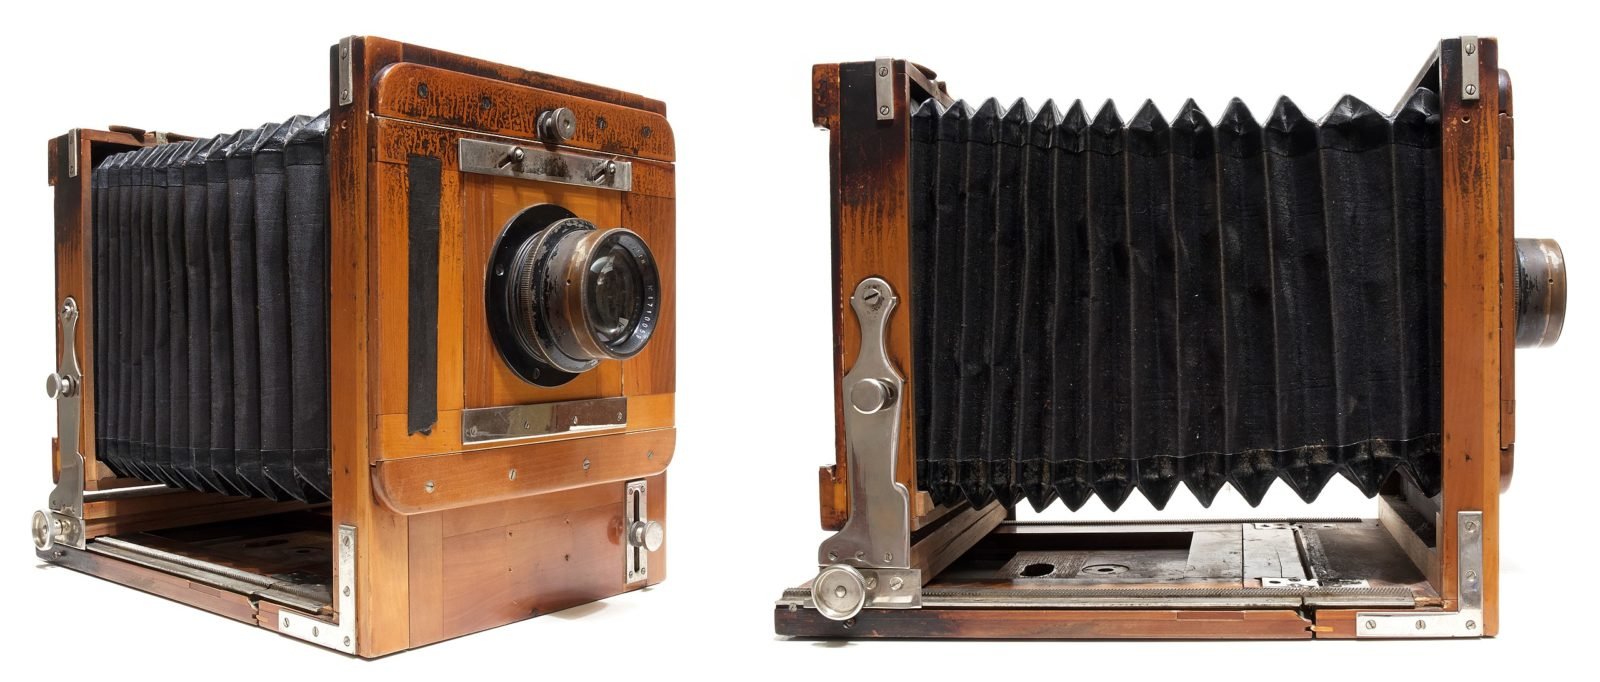 First Camera Invented By Alexander Wolcott